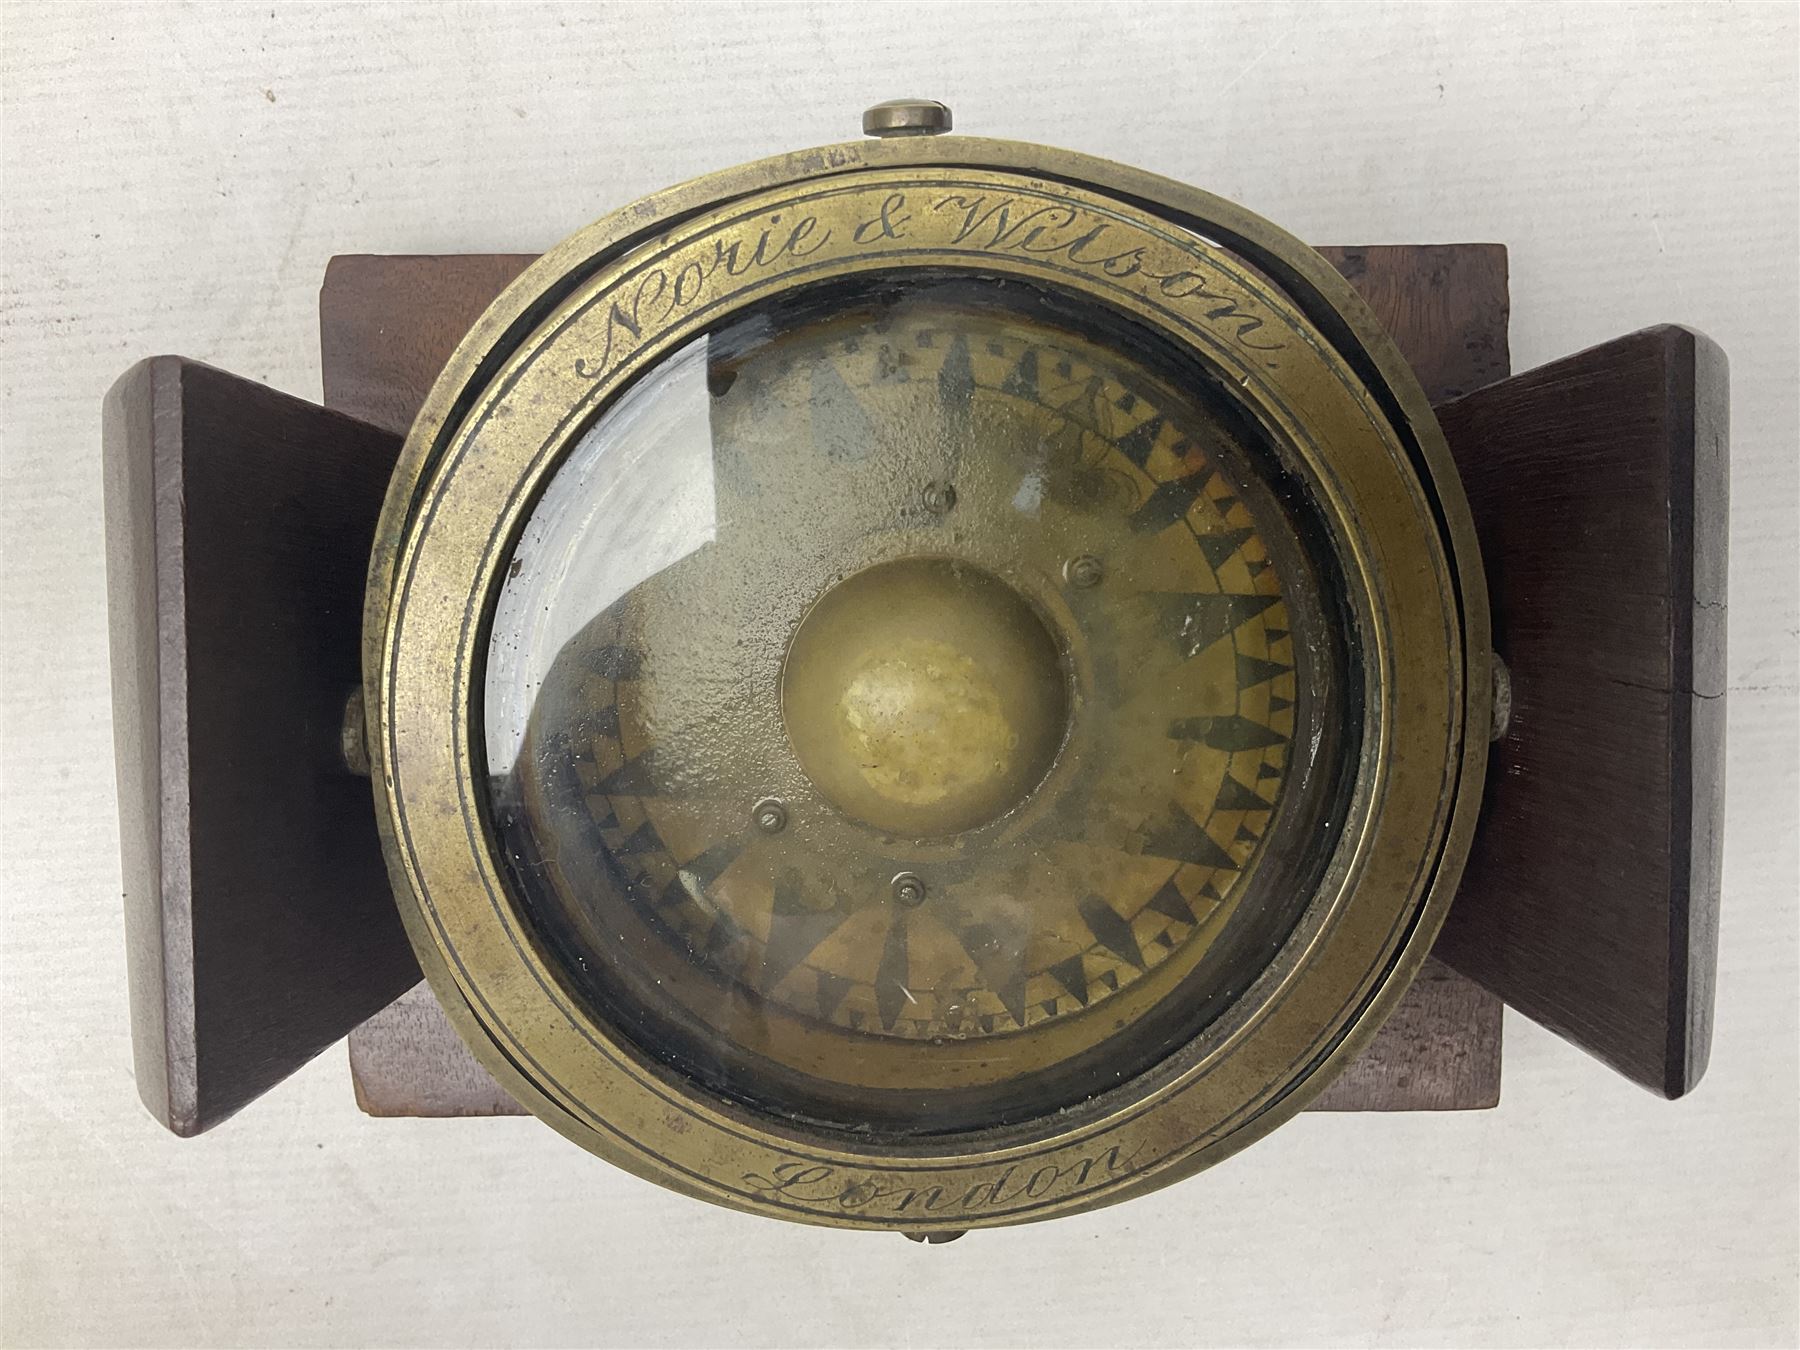 Ship's brass compass by Norie & Wilson - Image 6 of 9